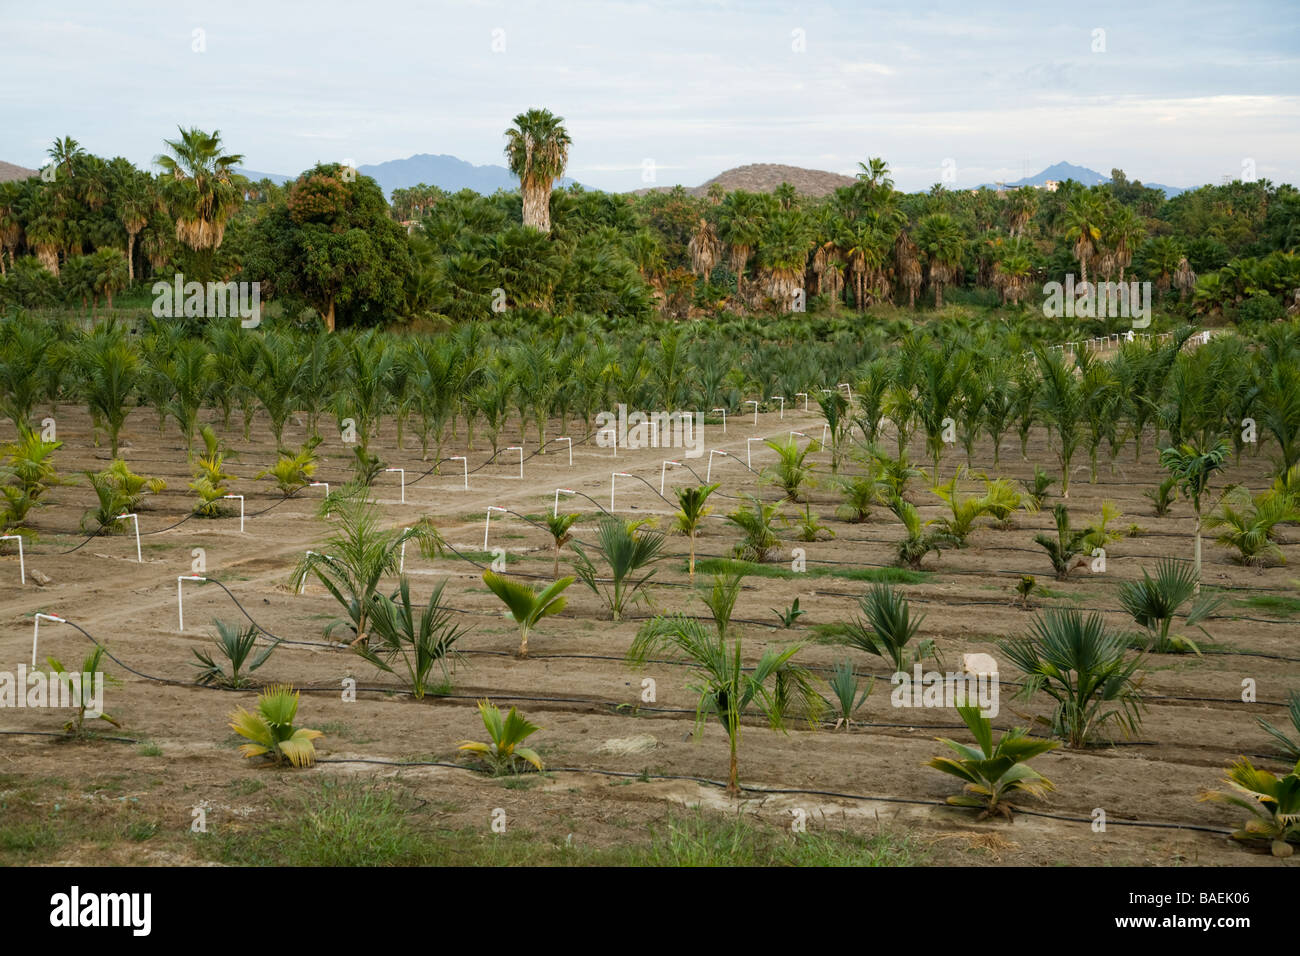 MEXICO Todos Santos Small and medium size palm trees and plants in irrigated agricultural field plant nursery Stock Photo